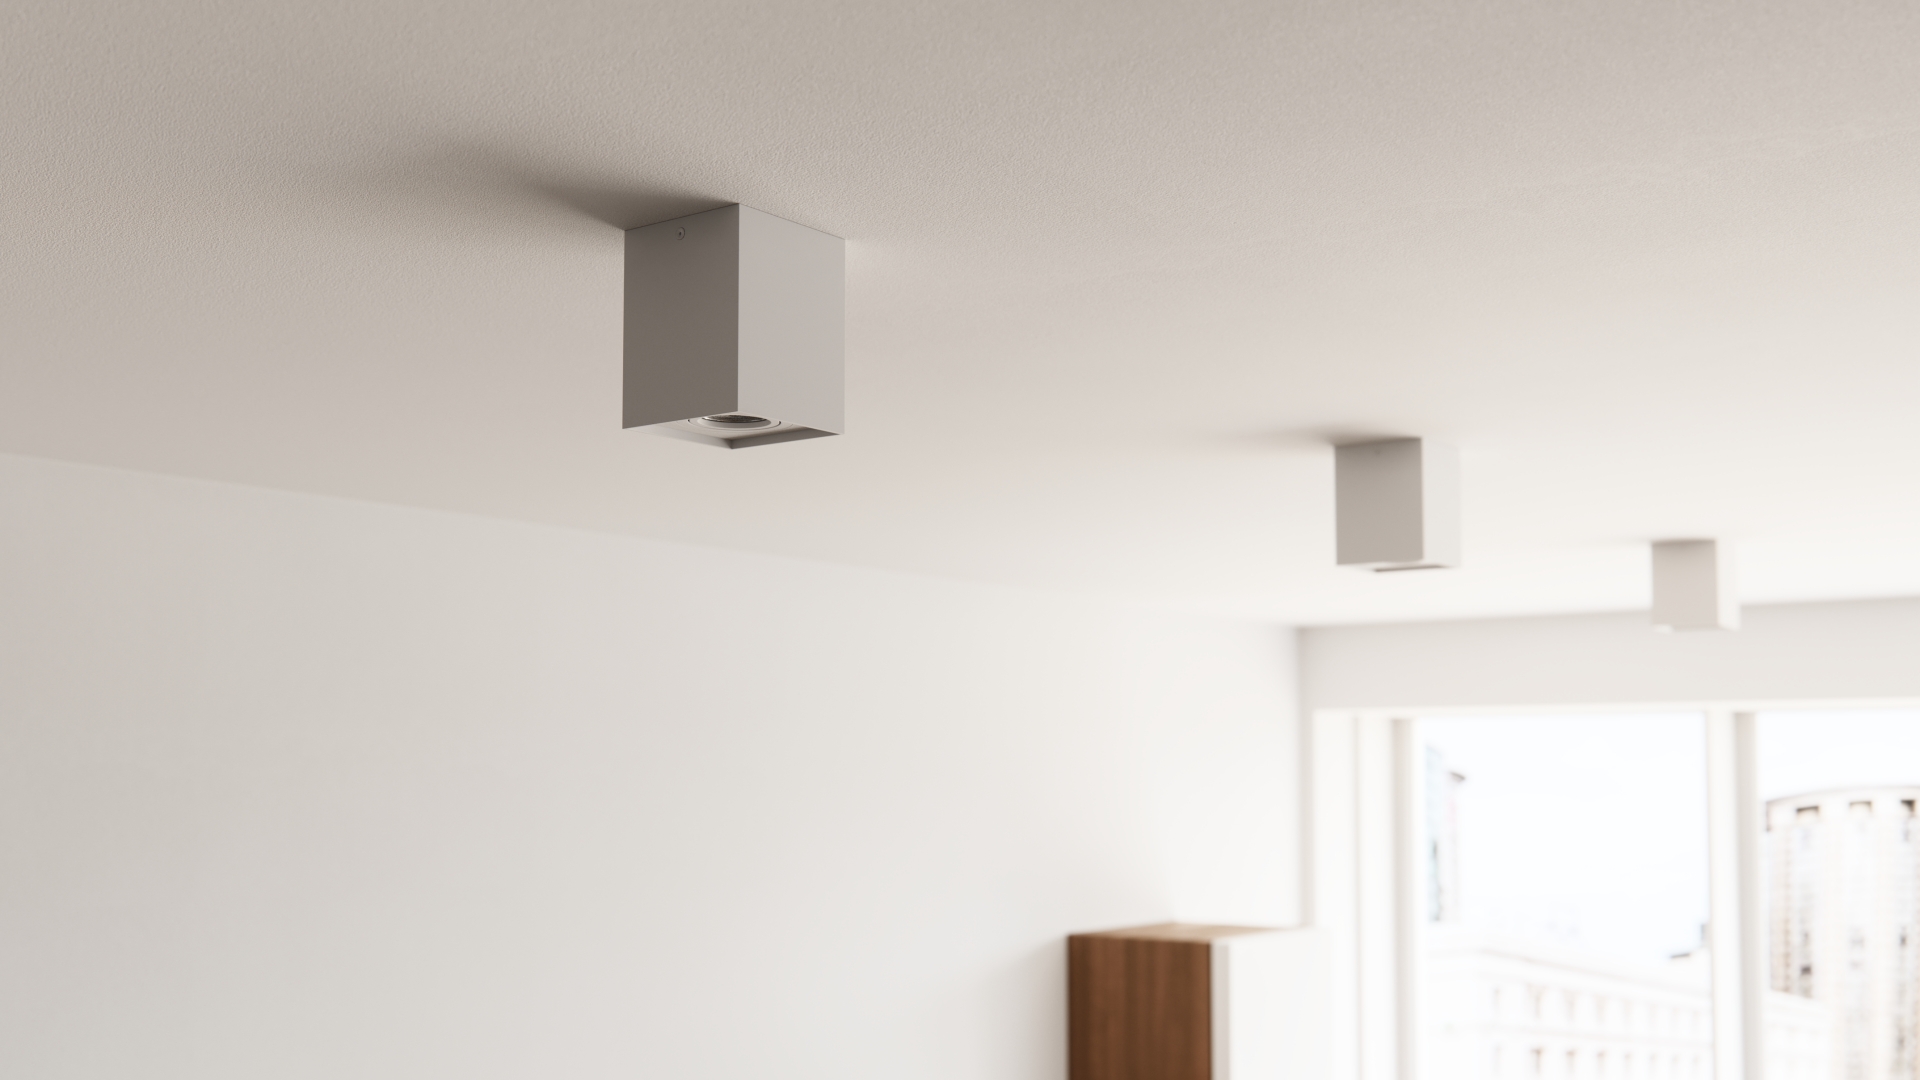 Tall white ceiling fixtures